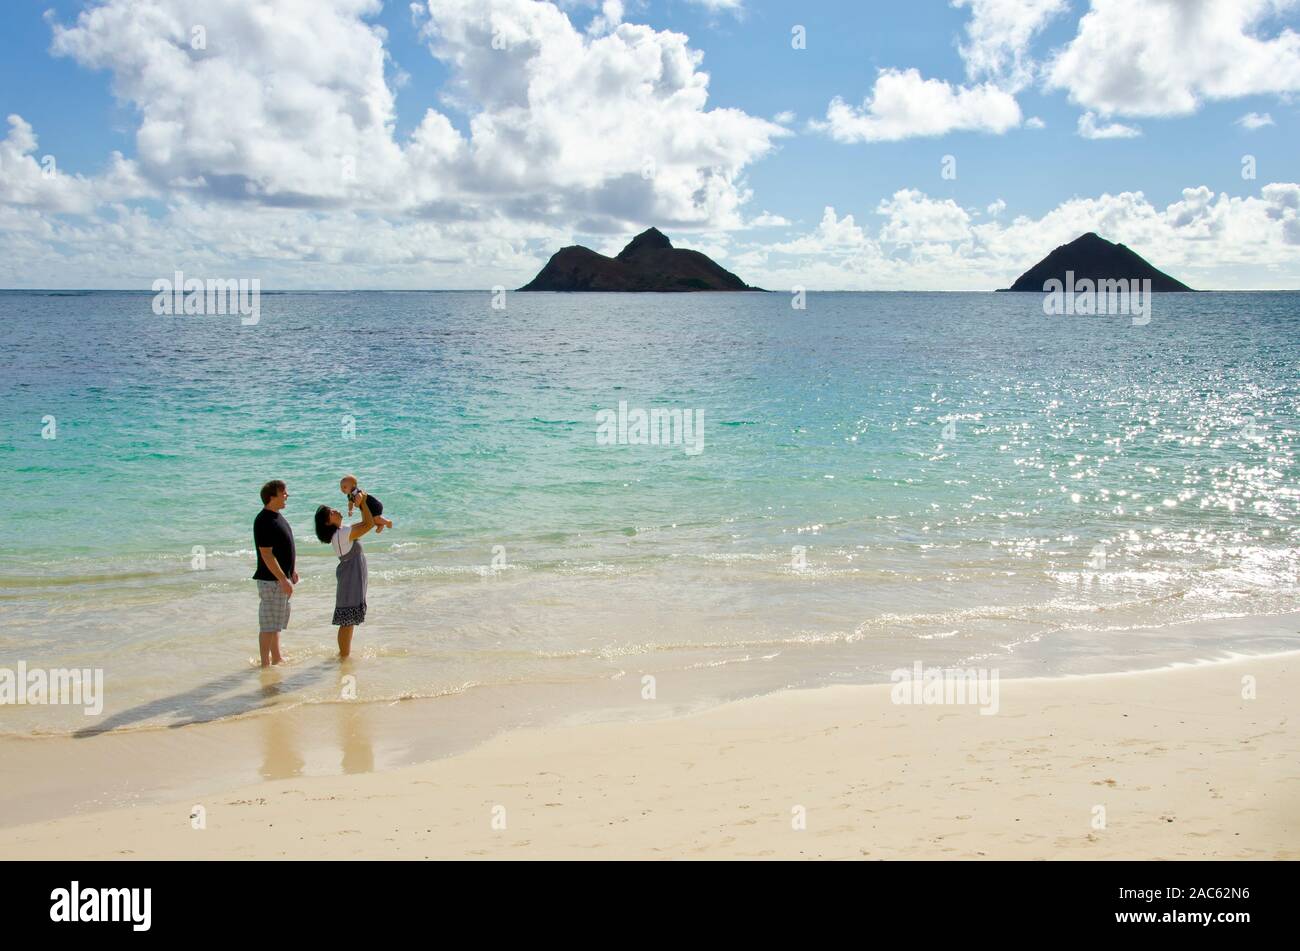 A father looking on while a mother lifts their son on Lanikai Beach, O'ahu, with the Mokulua Islands in the distance. Stock Photo